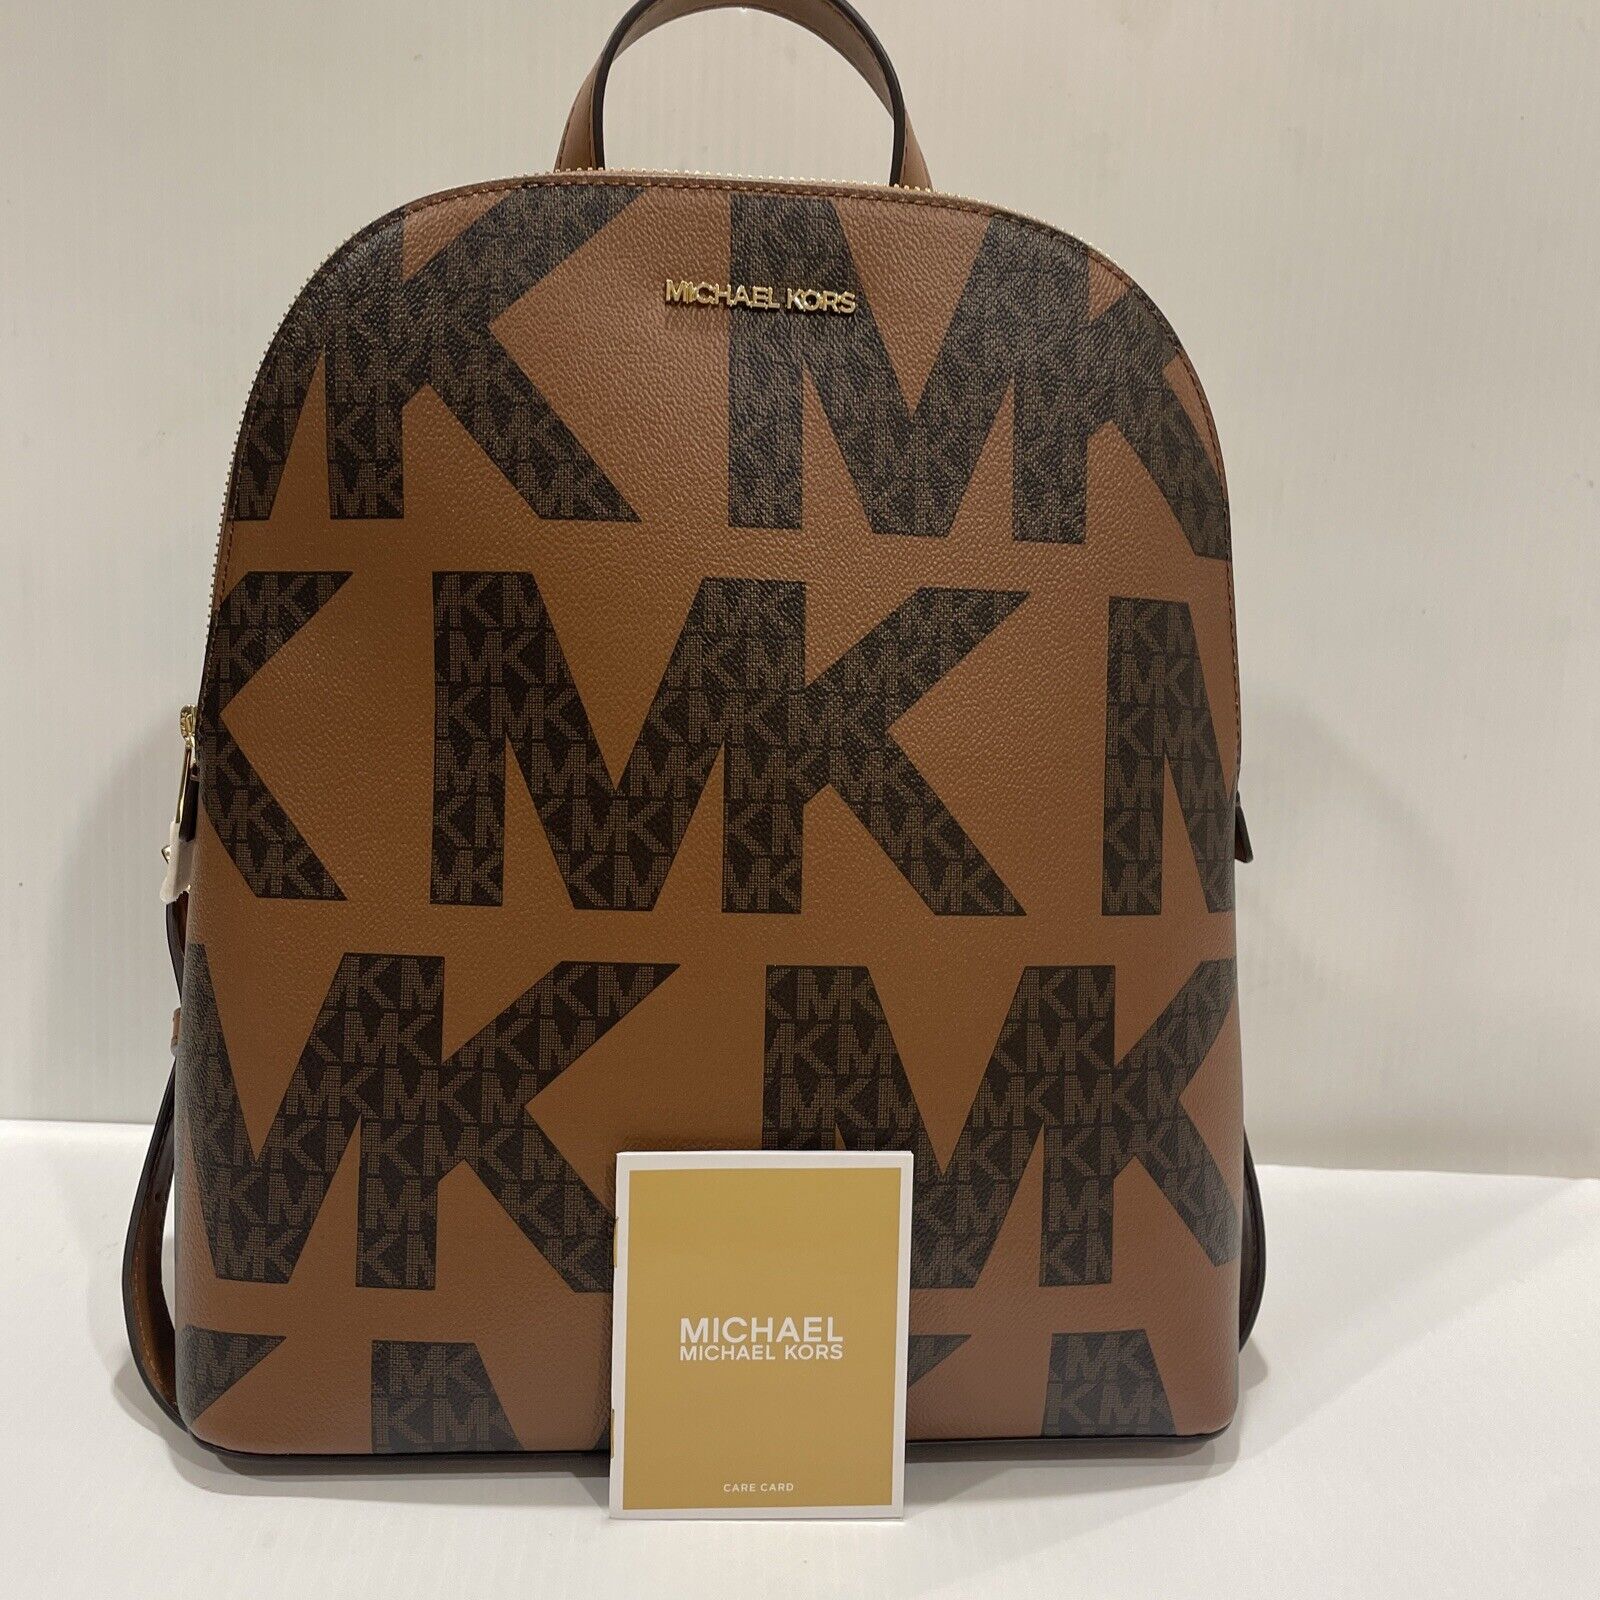 NWT $298 MICHAEL KORS CINDY LARGE GRAPHIC LOGO BACKPACK  LUGGAGE MULTI